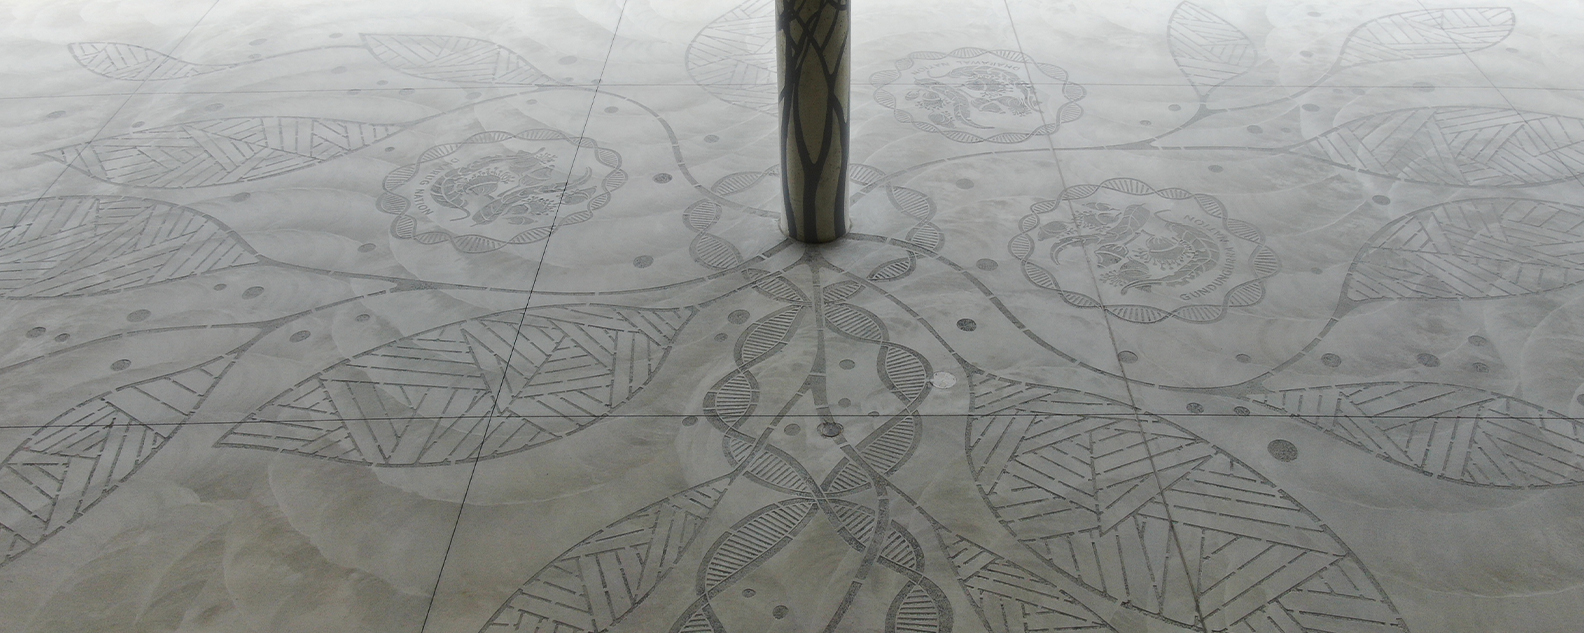 Intricate First Nations artwork sandblasted onto a concrete forecourt at the National Herbarium of New South Wales